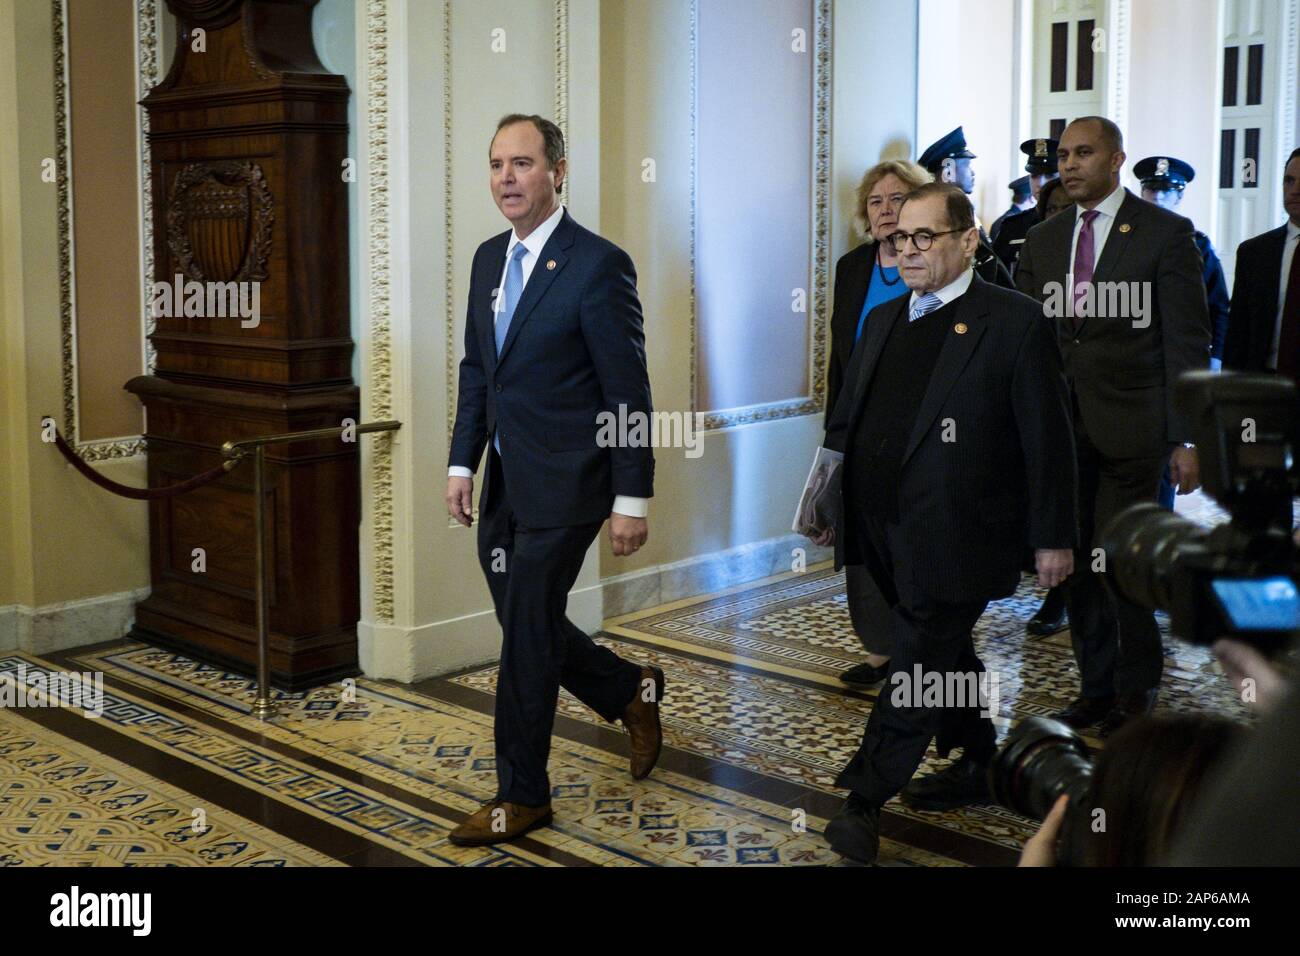 Washington, United States. 21st Jan, 2020. House impeachment managers, led by Rep. Adam Schiff (D-CA), walk to the United States Senate Chambers in the United States Capitol as the impeachment trial of President Donald Trump begins on Tuesday, January 21, 2020 in Washington, DC. One hundred United States Senators will serve as judges to decide whether to remove Trump from office for abusing power by pressuring Ukraine for personal political favors. Photo by Pete Marovich/UPI Credit: UPI/Alamy Live News Stock Photo